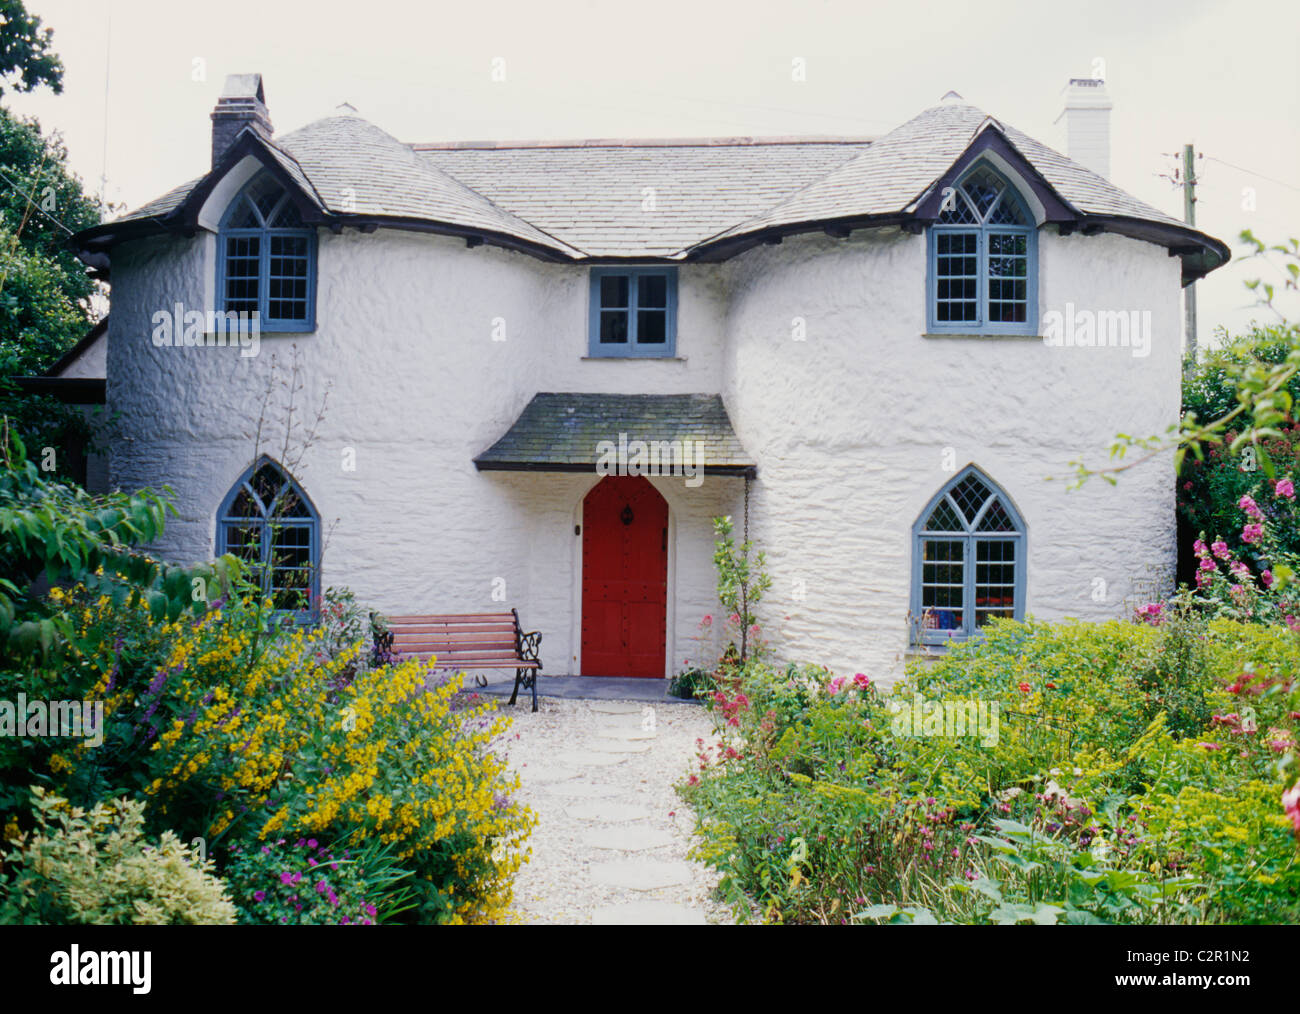 Cottage c.1790s; Picturesque features: gothick windows and circular bays, Regency style, summer garden. Philleigh, Cornwall. Stock Photo